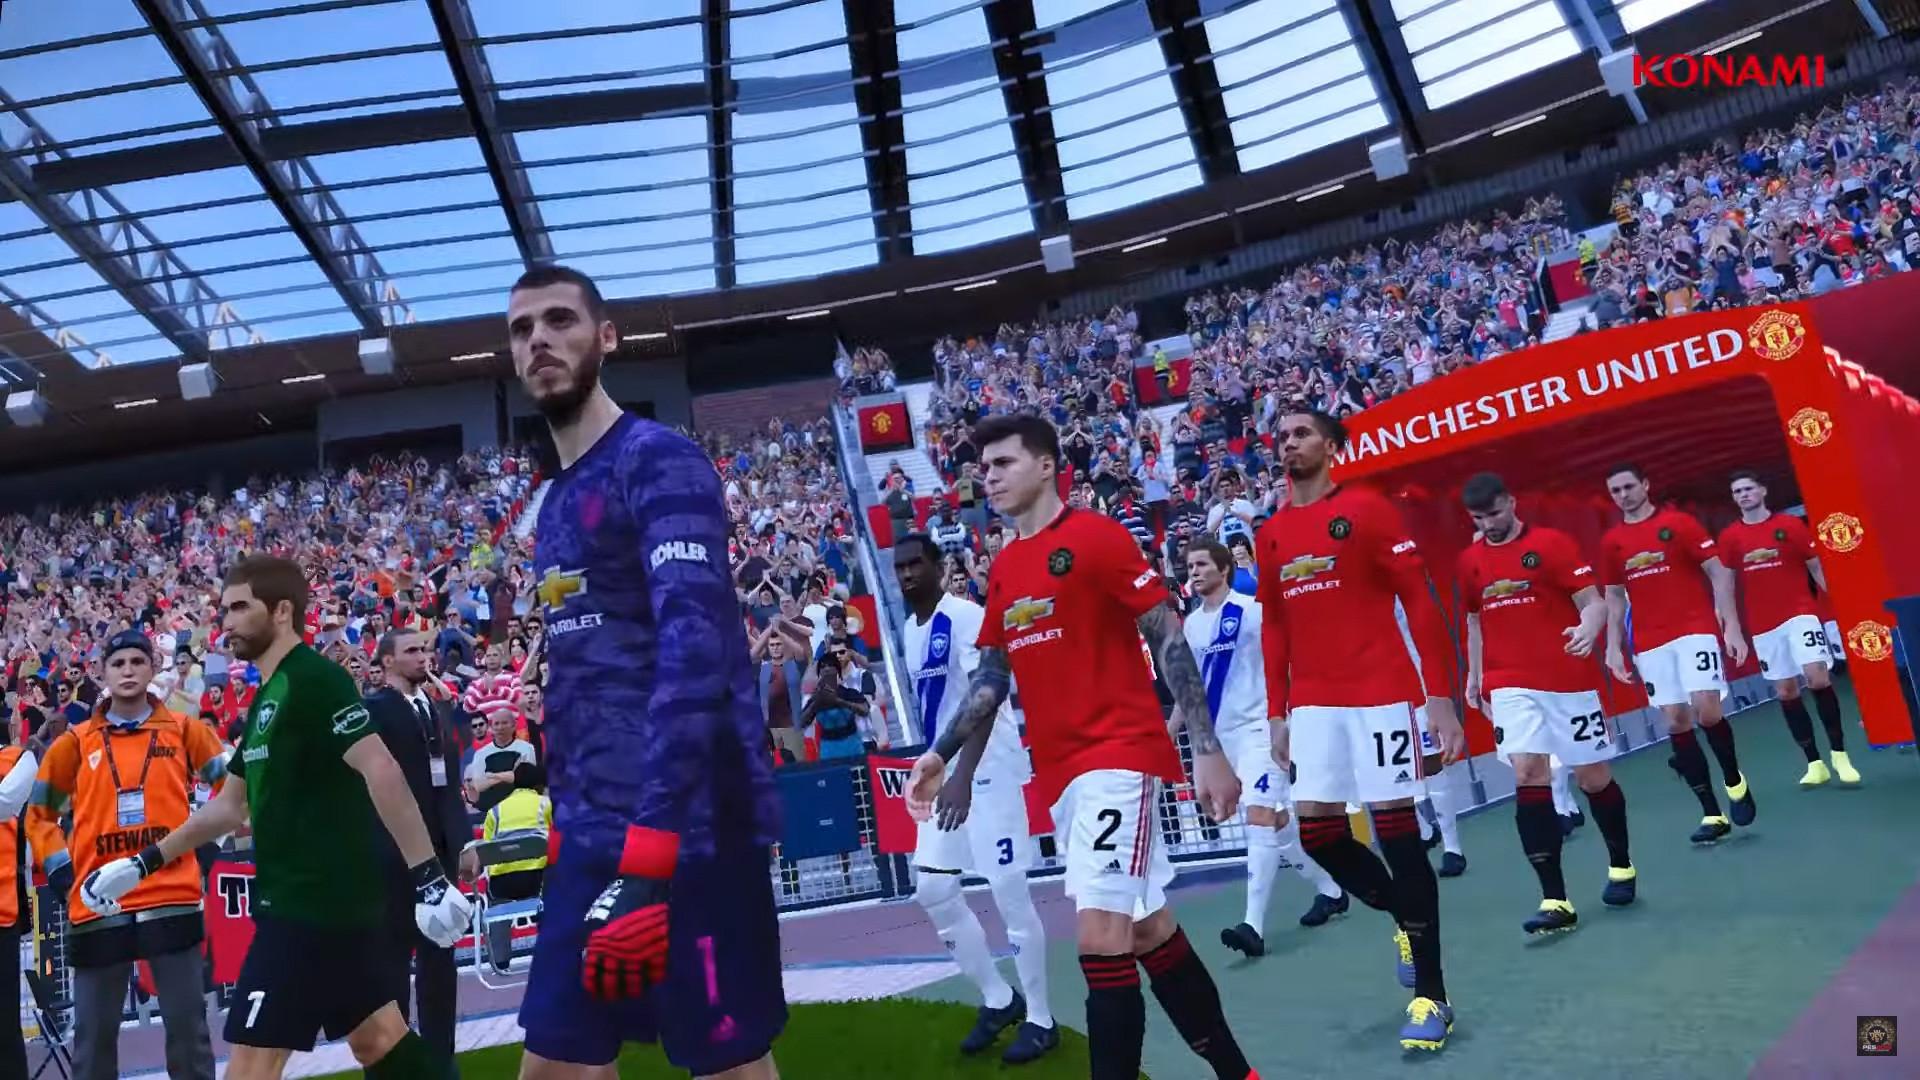 PES 2020 bags Manchester United license, but loses Liverpool